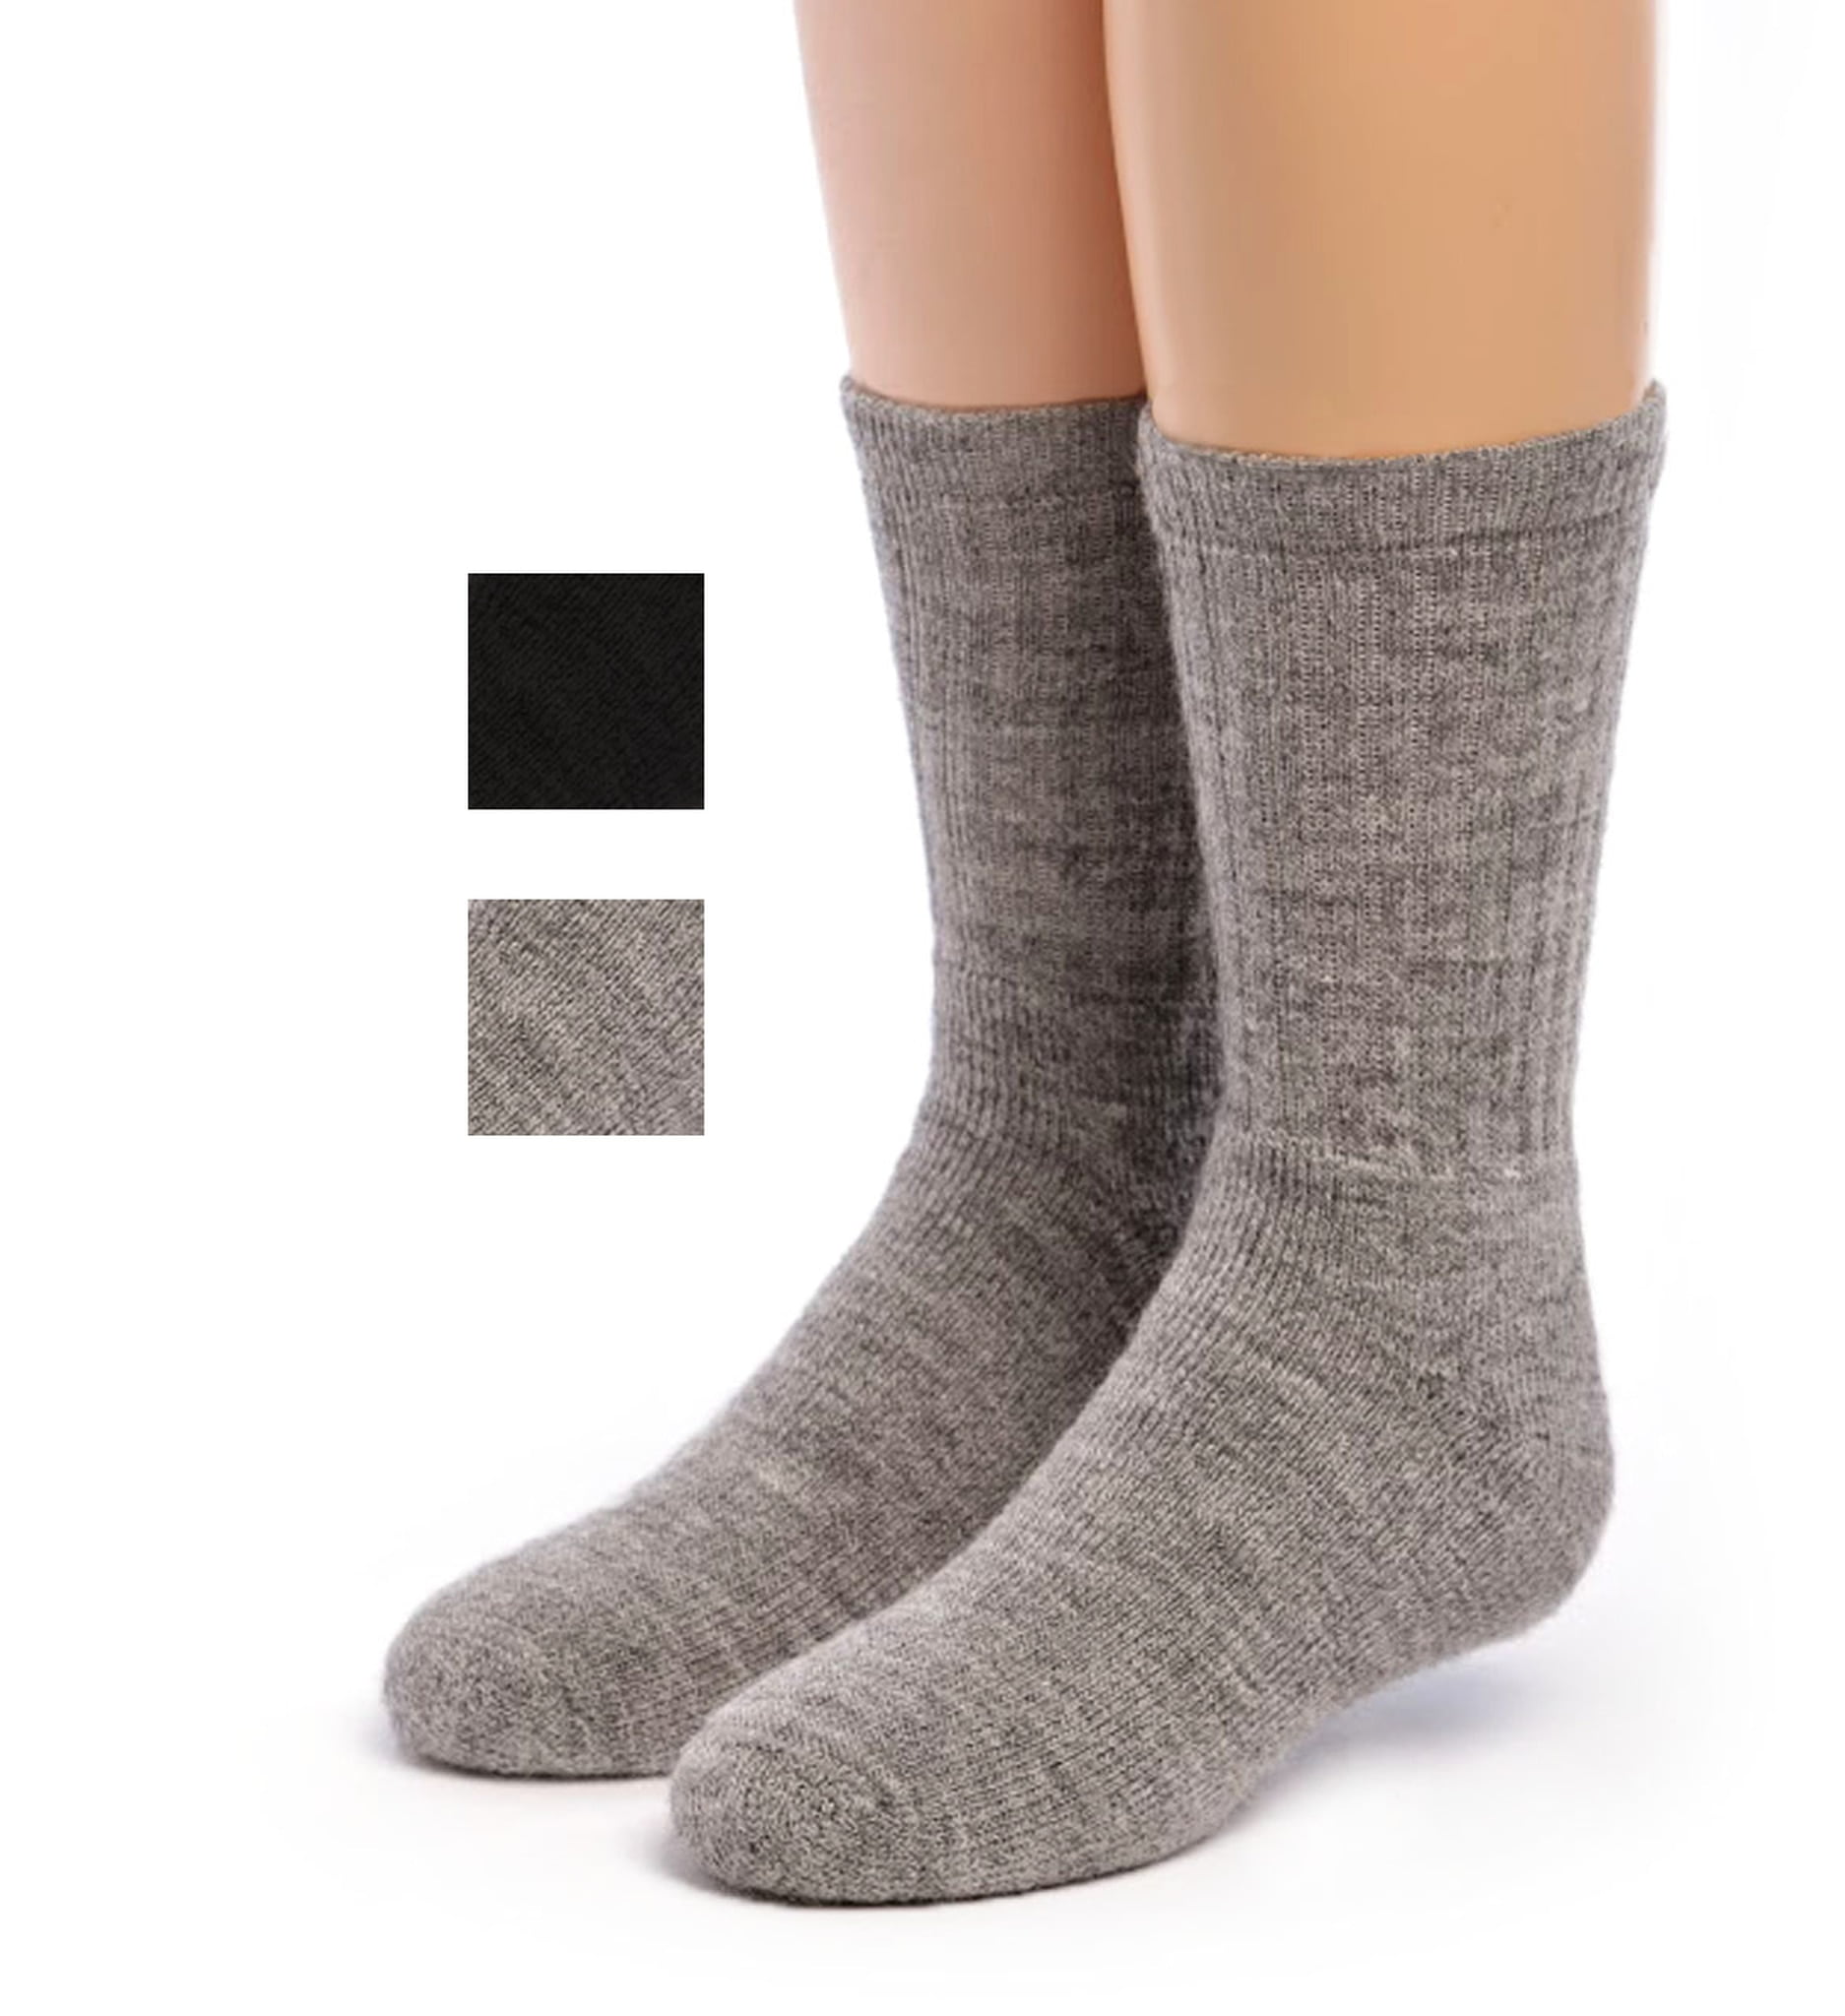 Quality assurance Up to 50% Off 300,000 Products Warrior Alpaca Socks ...